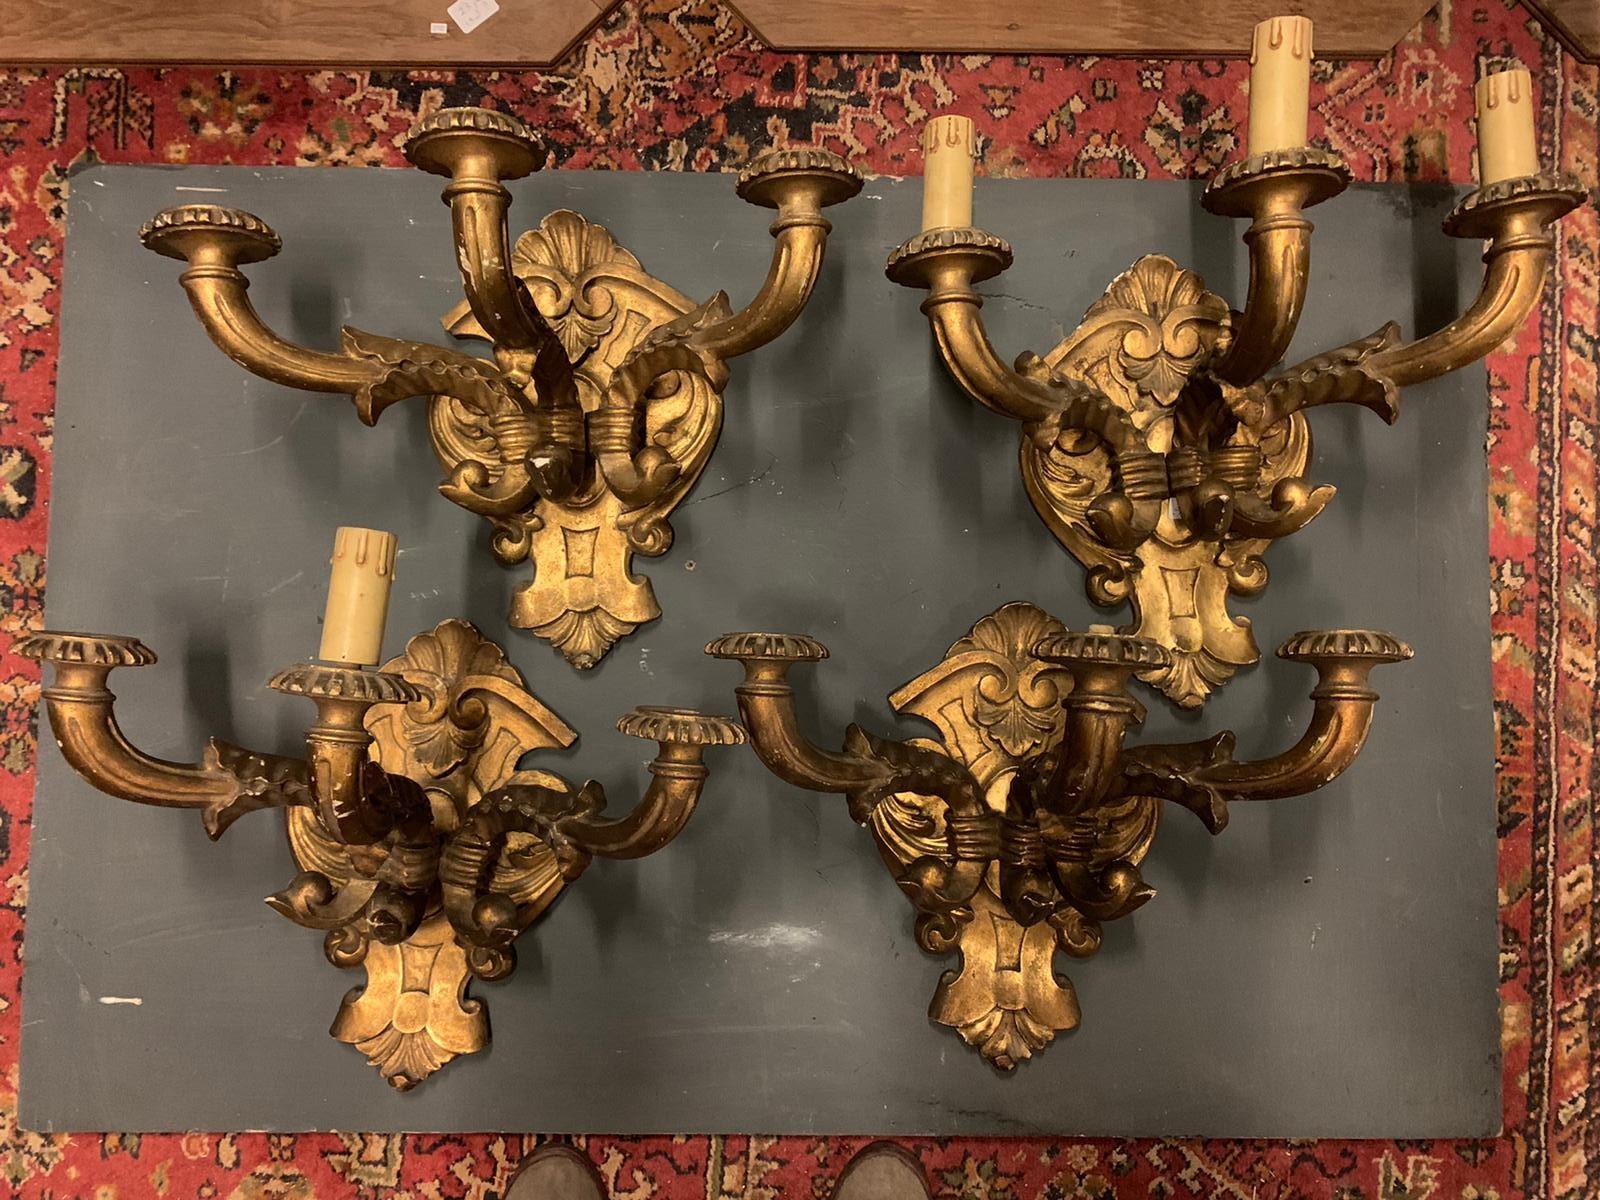 Set of 4 appliques, wall lamps in gilded and carved wood, each has 3 arms with light, to be revised in some parts but in a good state of conservation of the structure, beautiful in the set, from the mid-1900s then Vintage, made in Italy.
Each